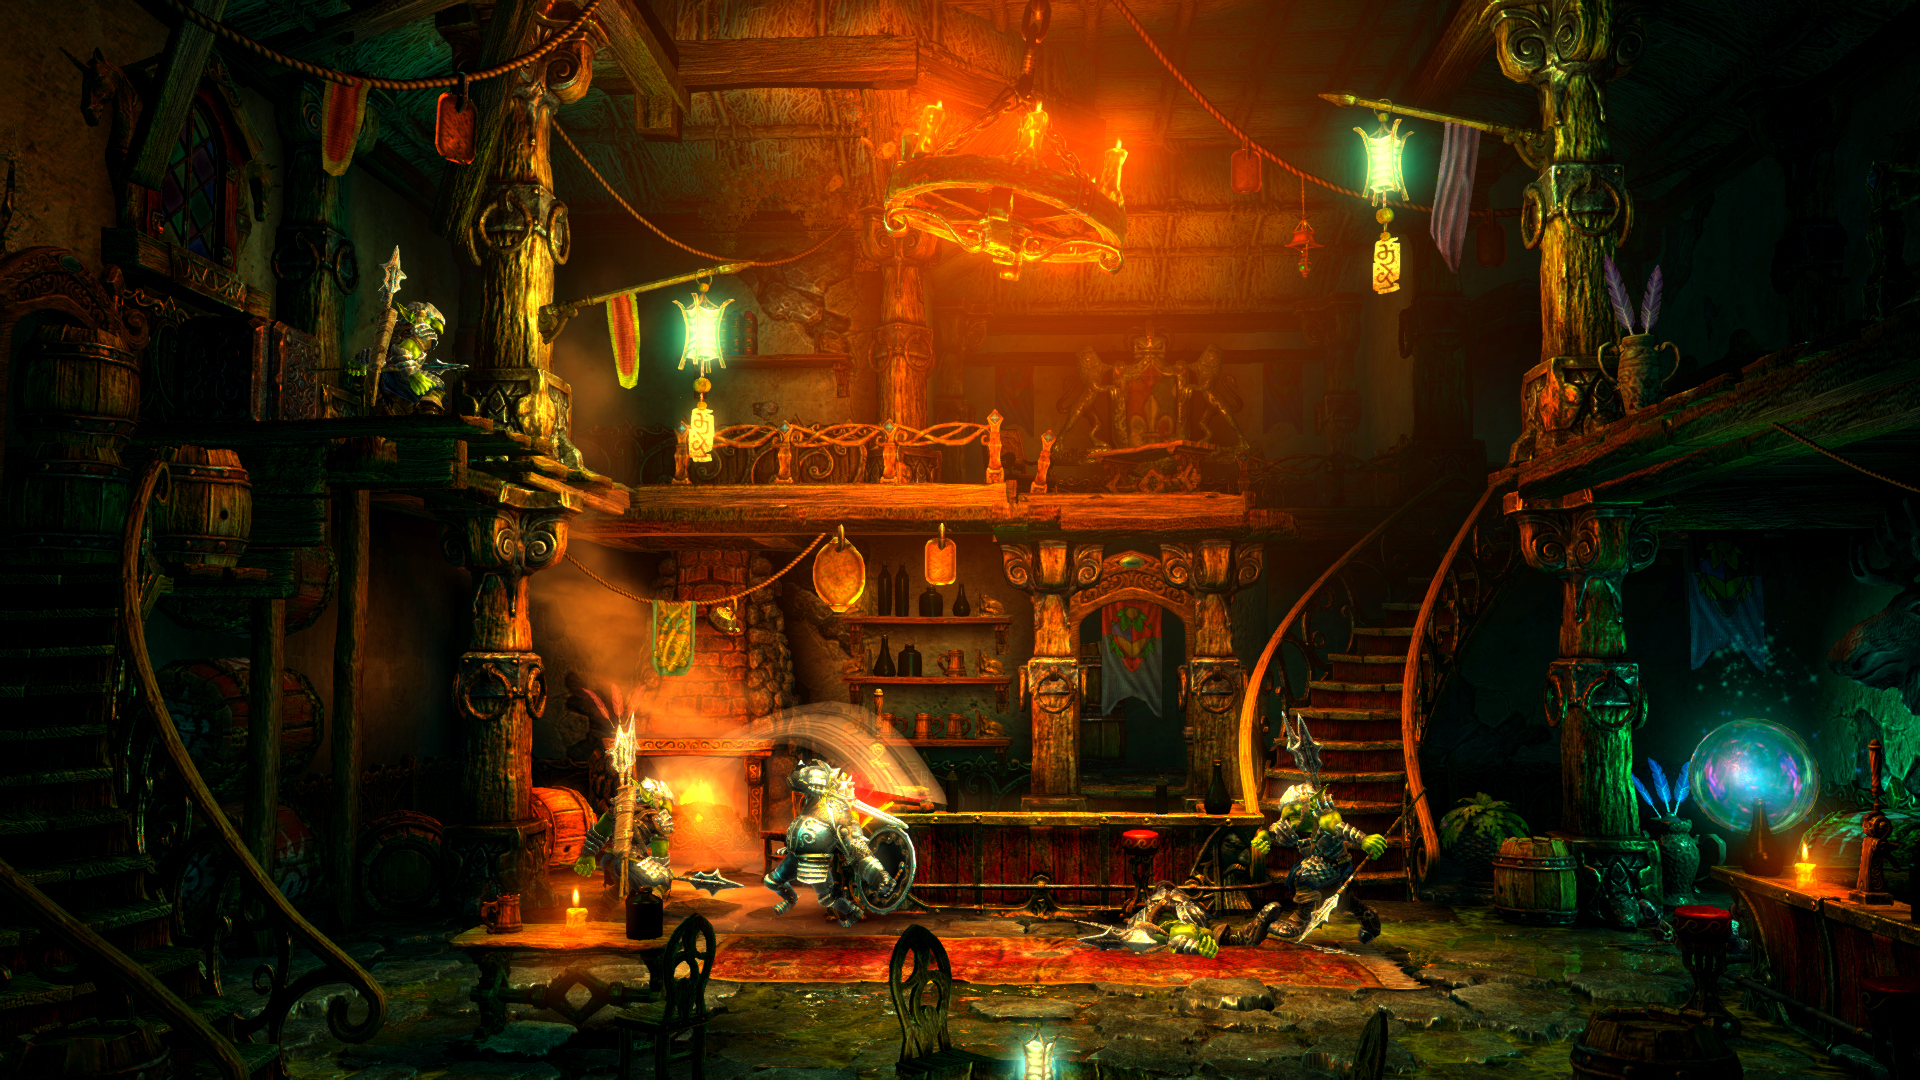 Trine 2 is one of those games that just blew me away with its amazingly pretty visuals and level designs. It's a game that I believe everyone should ...